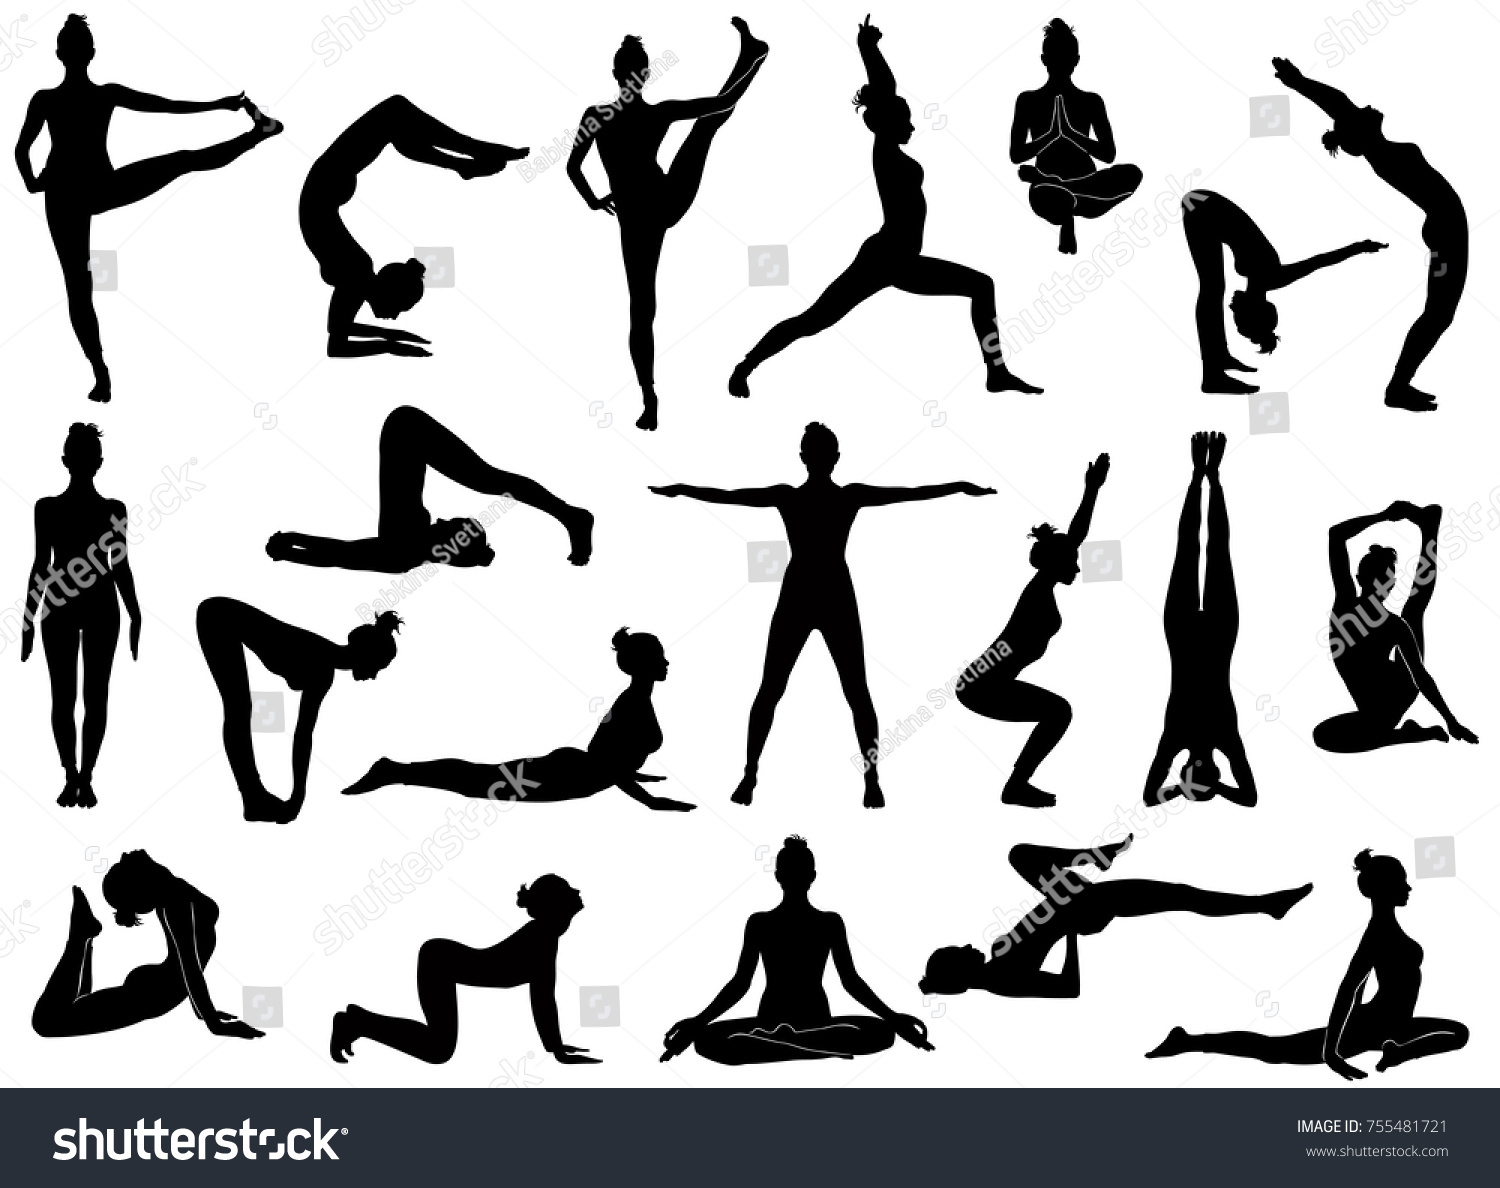 SVG of Set of vector silhouettes of woman doing yoga exercises.  Icons of flexible girl stretching her body in different yoga poses. Black shapes of woman isolated on white background. svg